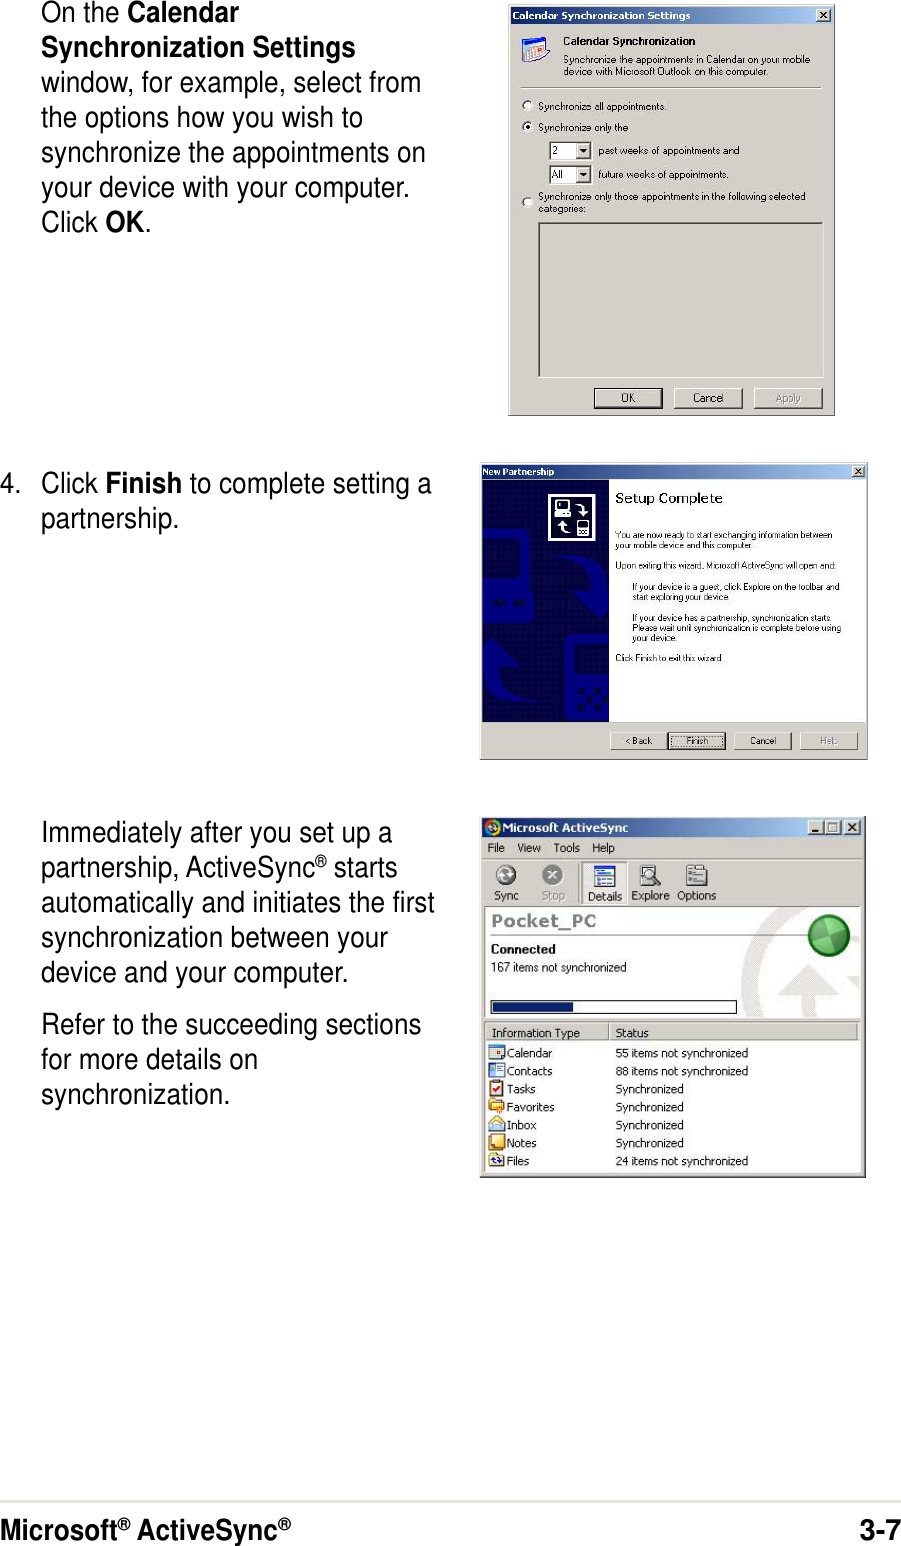 Microsoft® ActiveSync®3-7On the CalendarSynchronization Settingswindow, for example, select fromthe options how you wish tosynchronize the appointments onyour device with your computer.Click OK.4. Click Finish to complete setting apartnership.Immediately after you set up apartnership, ActiveSync® startsautomatically and initiates the firstsynchronization between yourdevice and your computer.Refer to the succeeding sectionsfor more details onsynchronization.